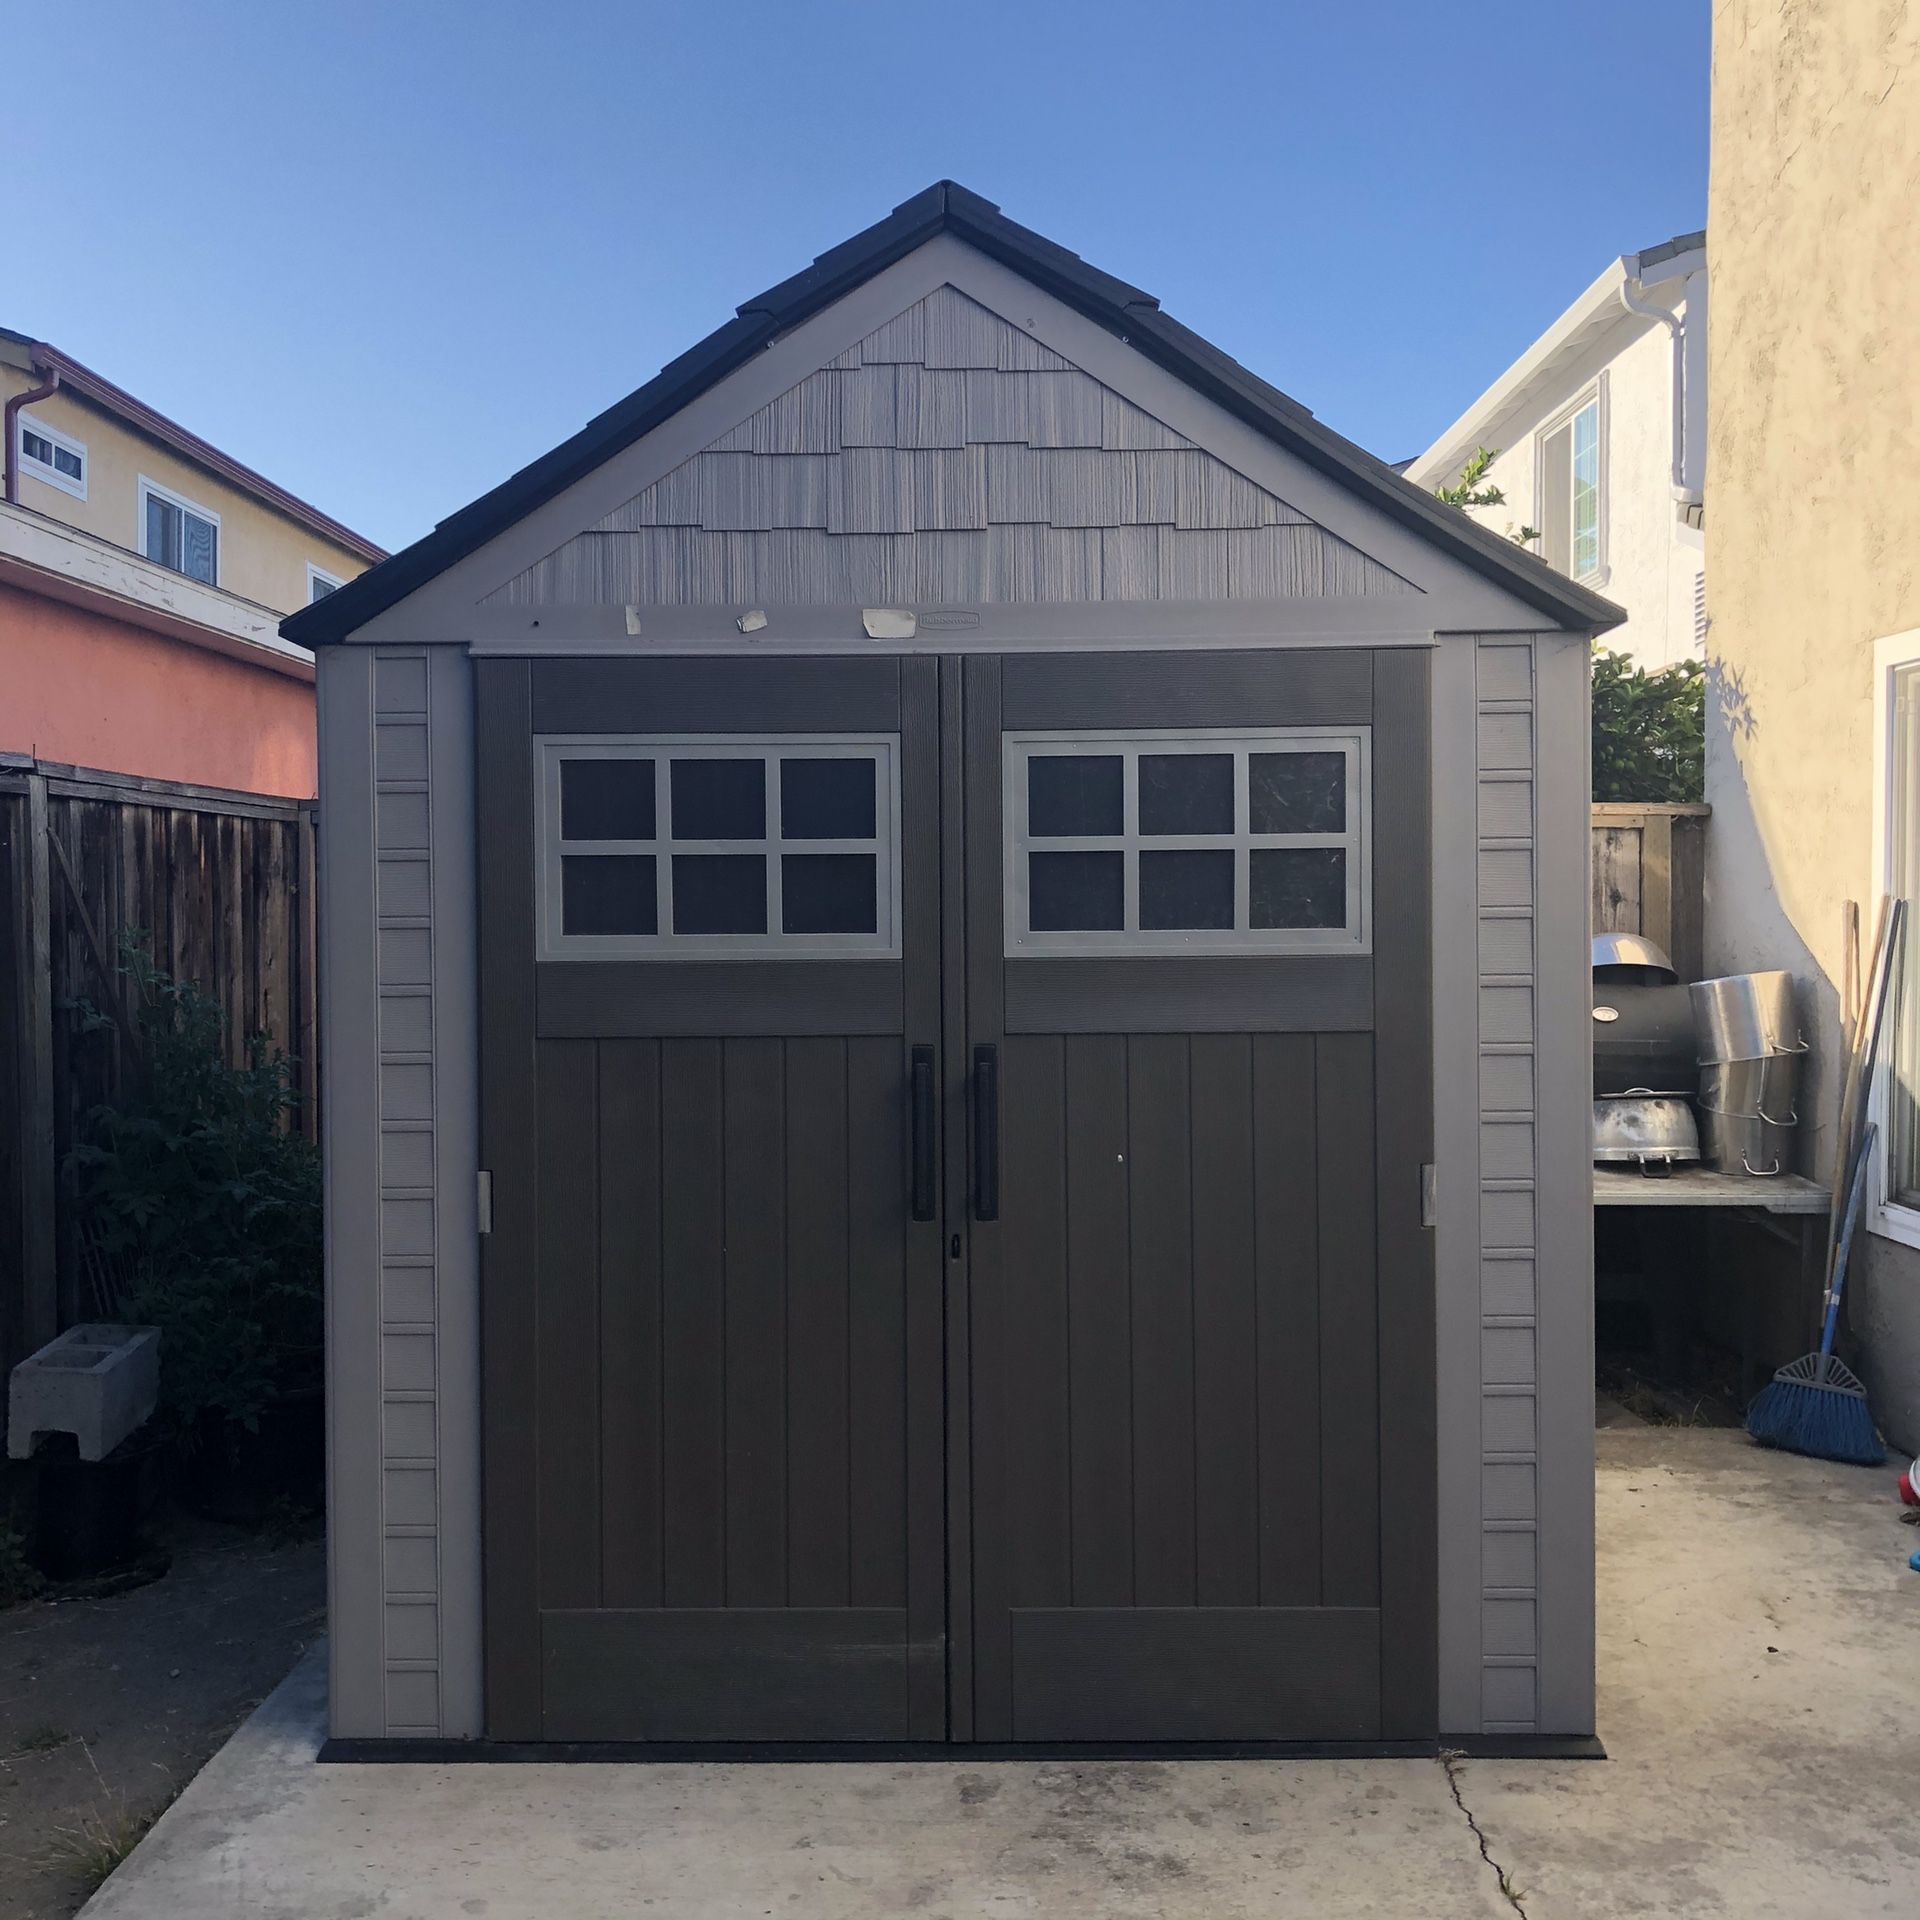 Shed for sale!